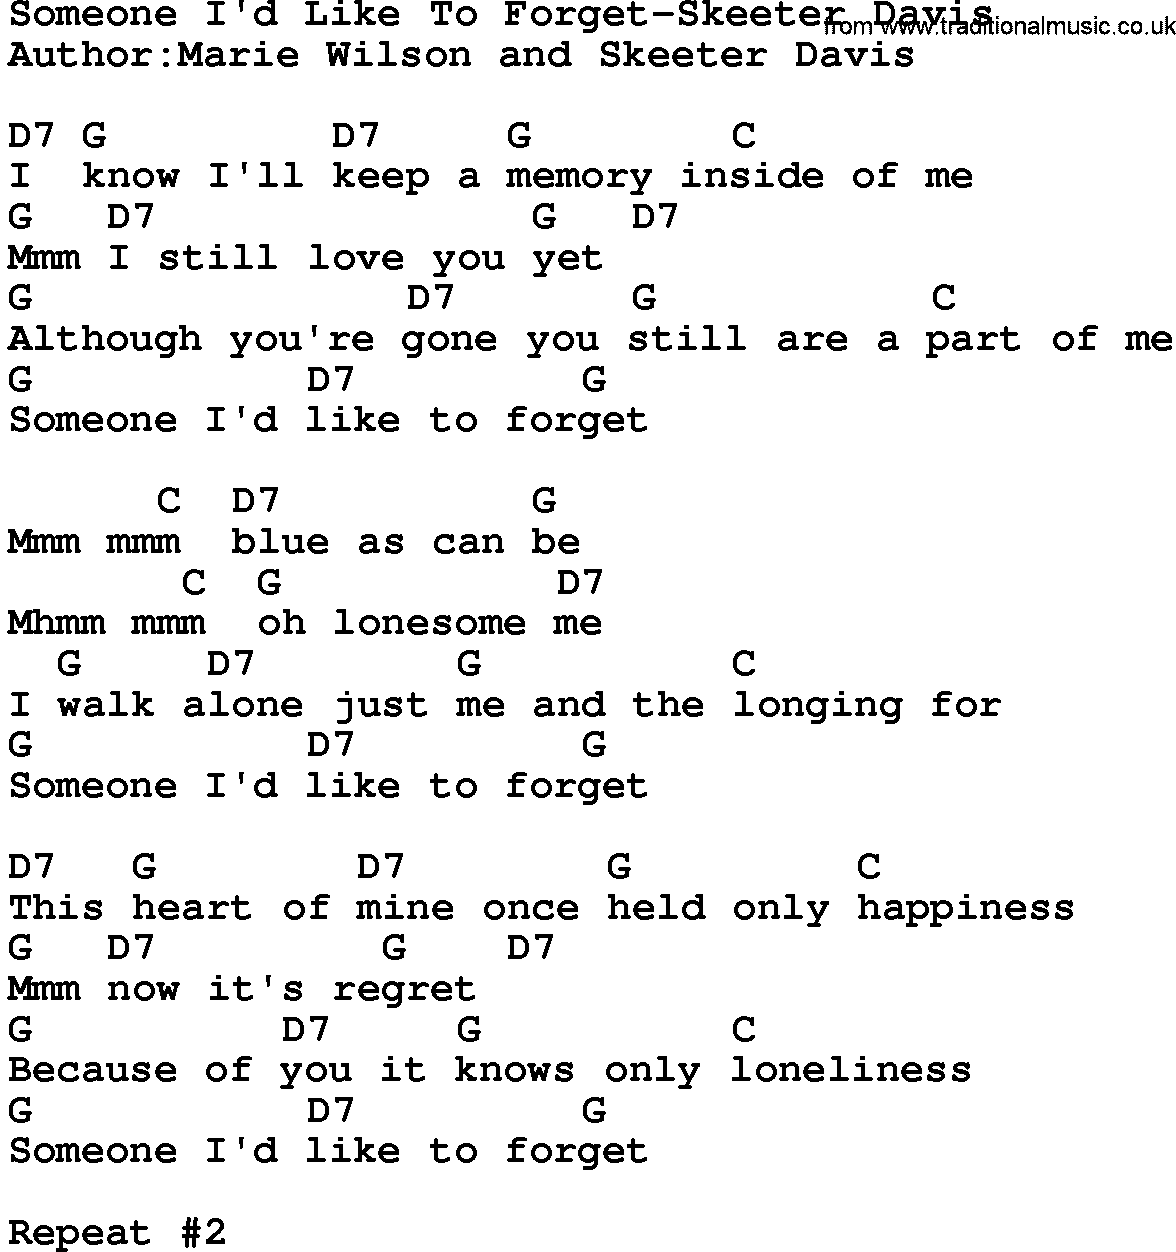 Country music song: Someone I'd Like To Forget-Skeeter Davis lyrics and chords